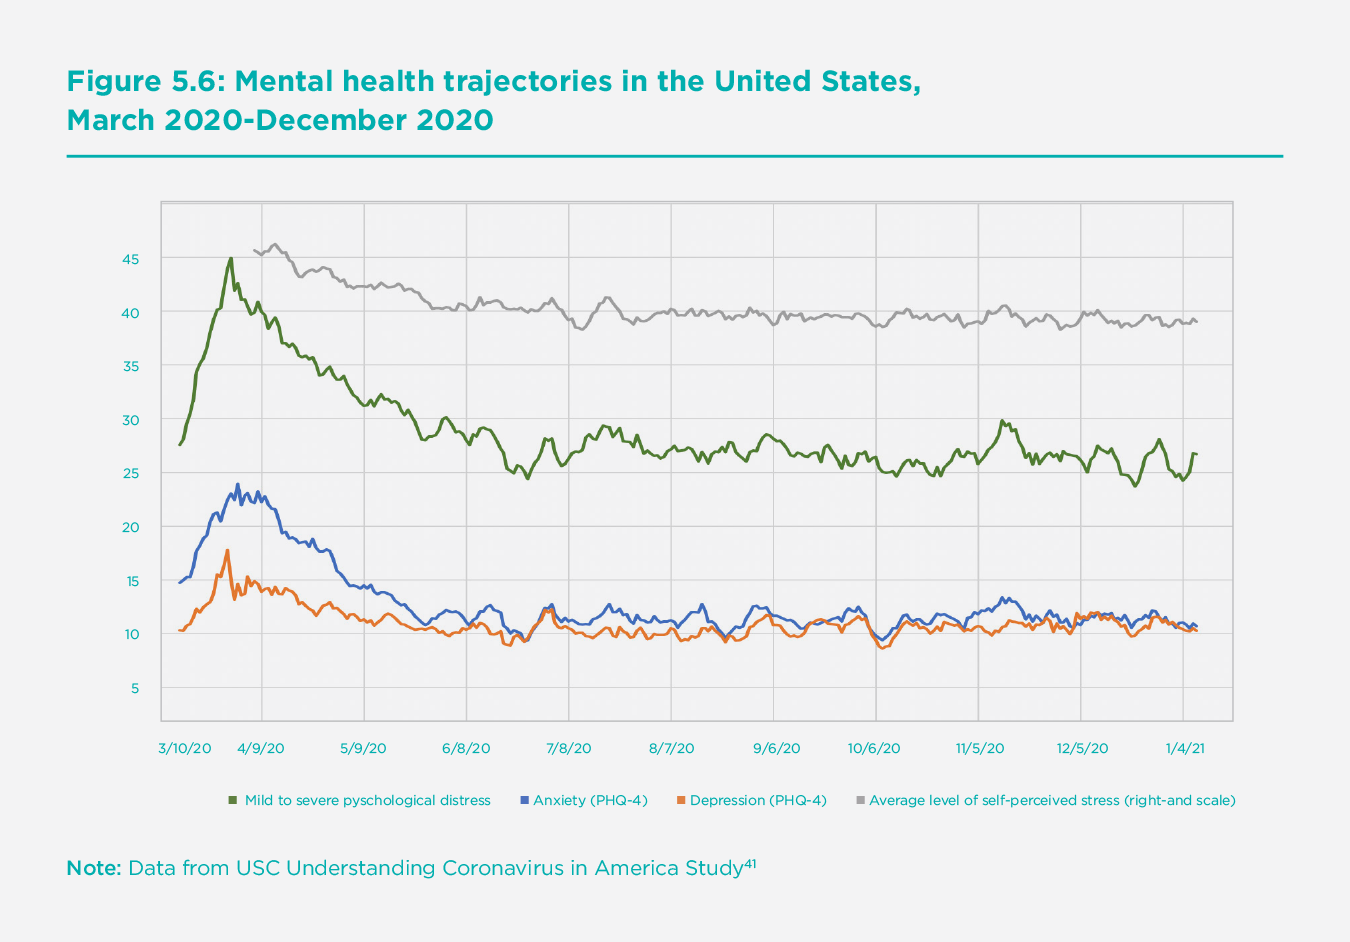 Figure 5.6 Mental health trajectories in the United States, March 2020-December 2020